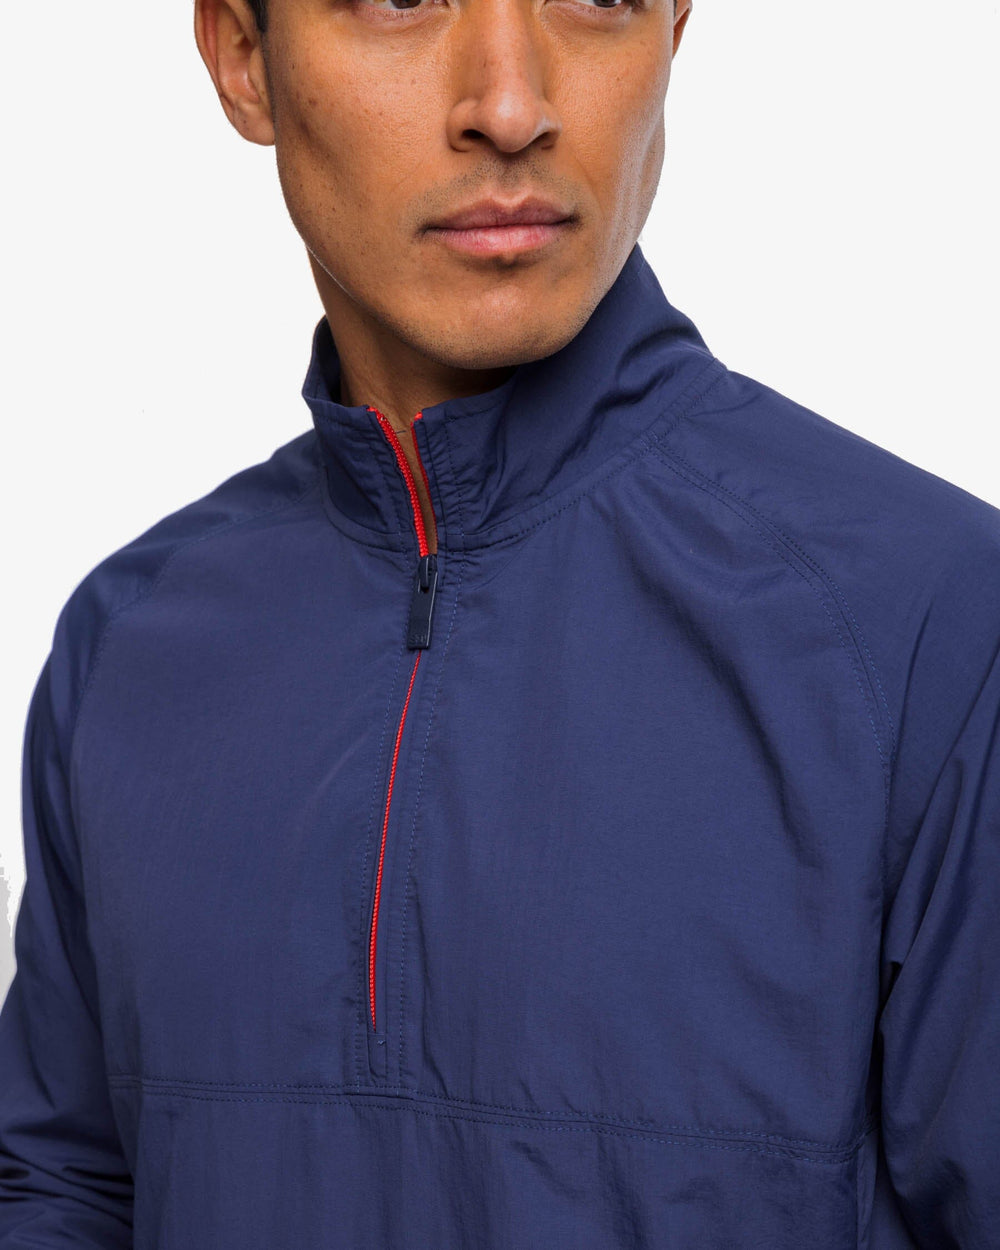 The detail view of the Southern Tide Shoreline Performance Pullover by Southern Tide - True Navy